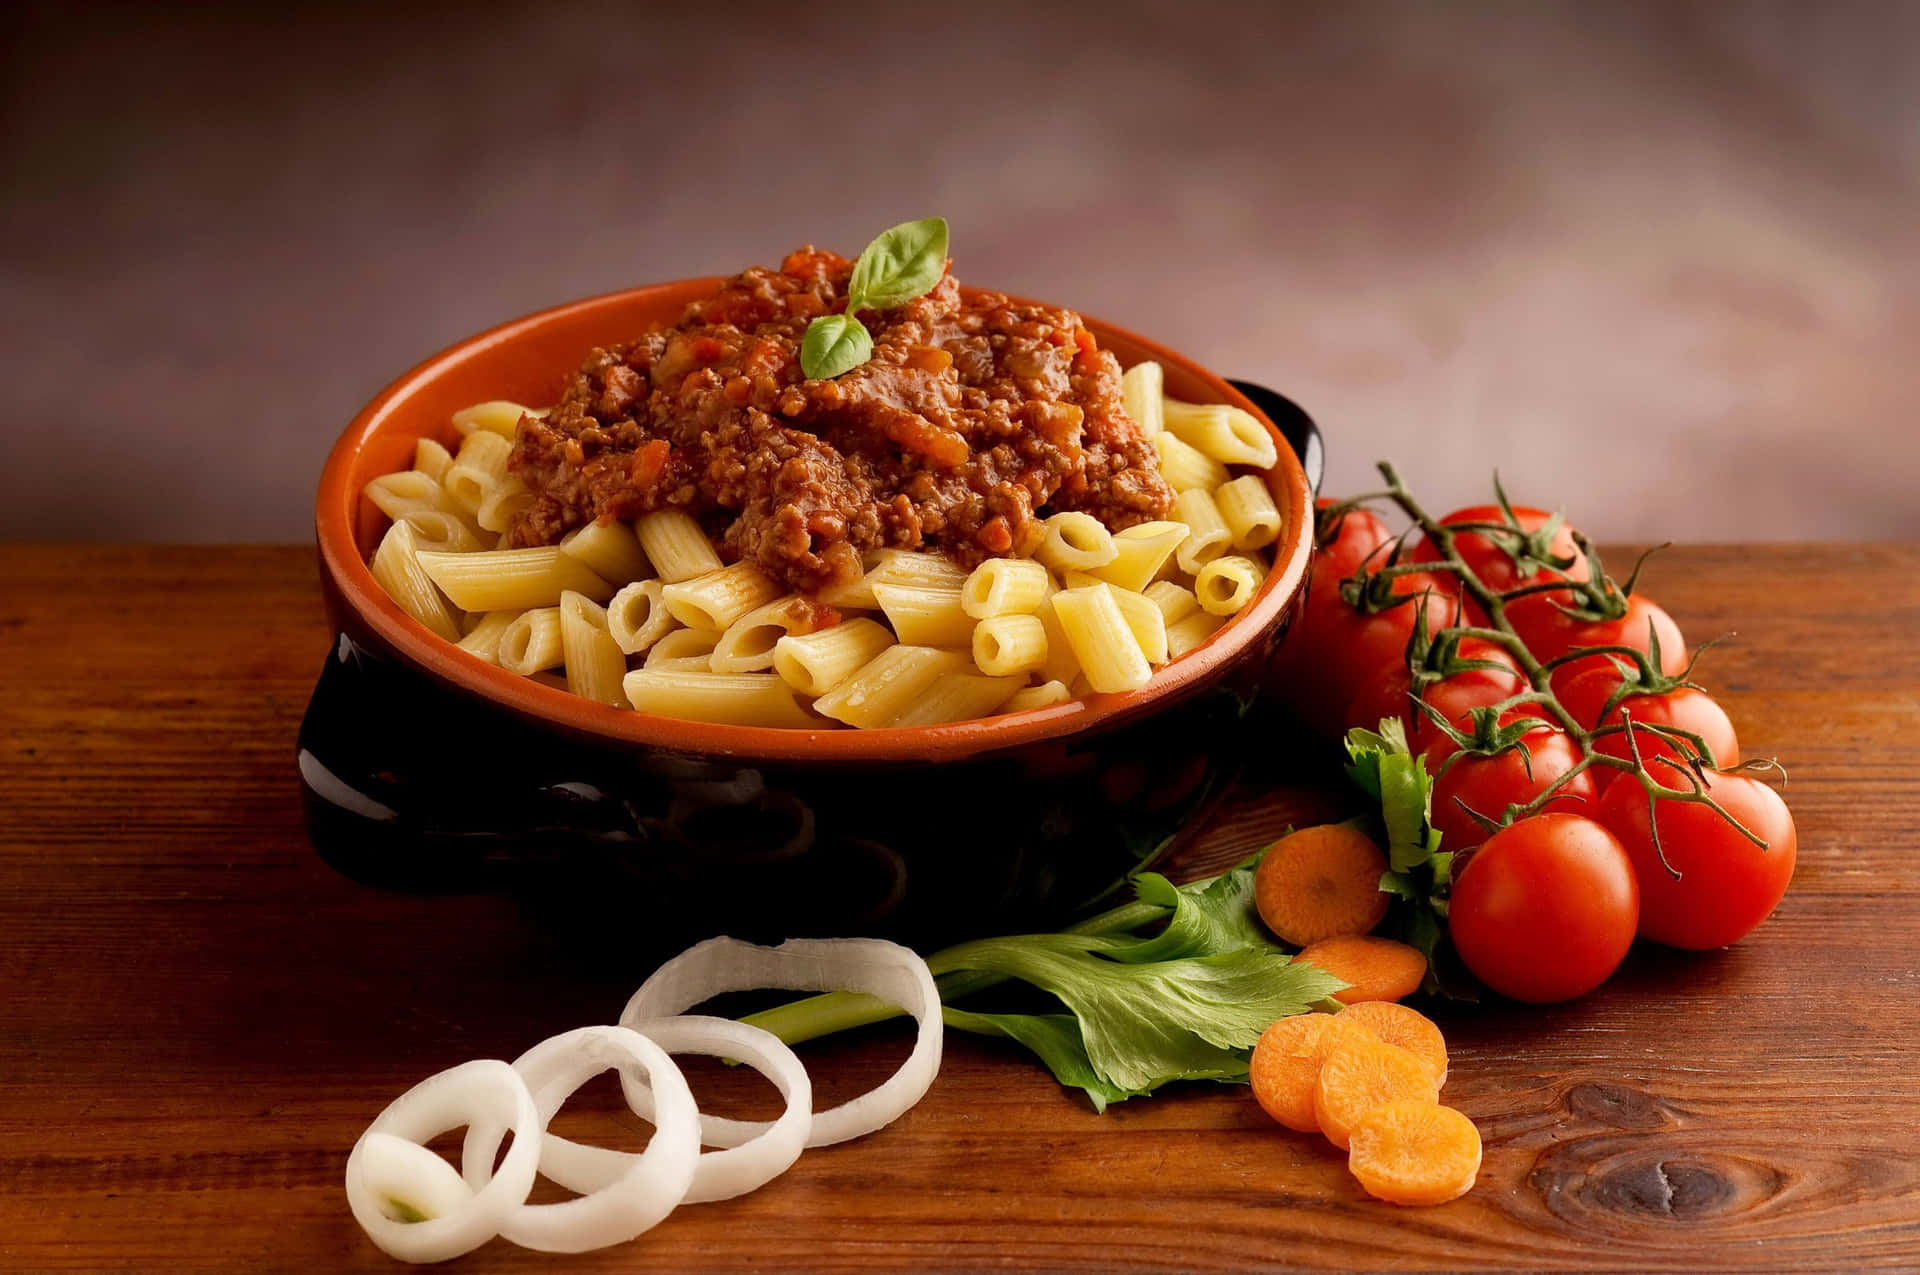 A Bowl Of Pasta With Meat And Vegetables